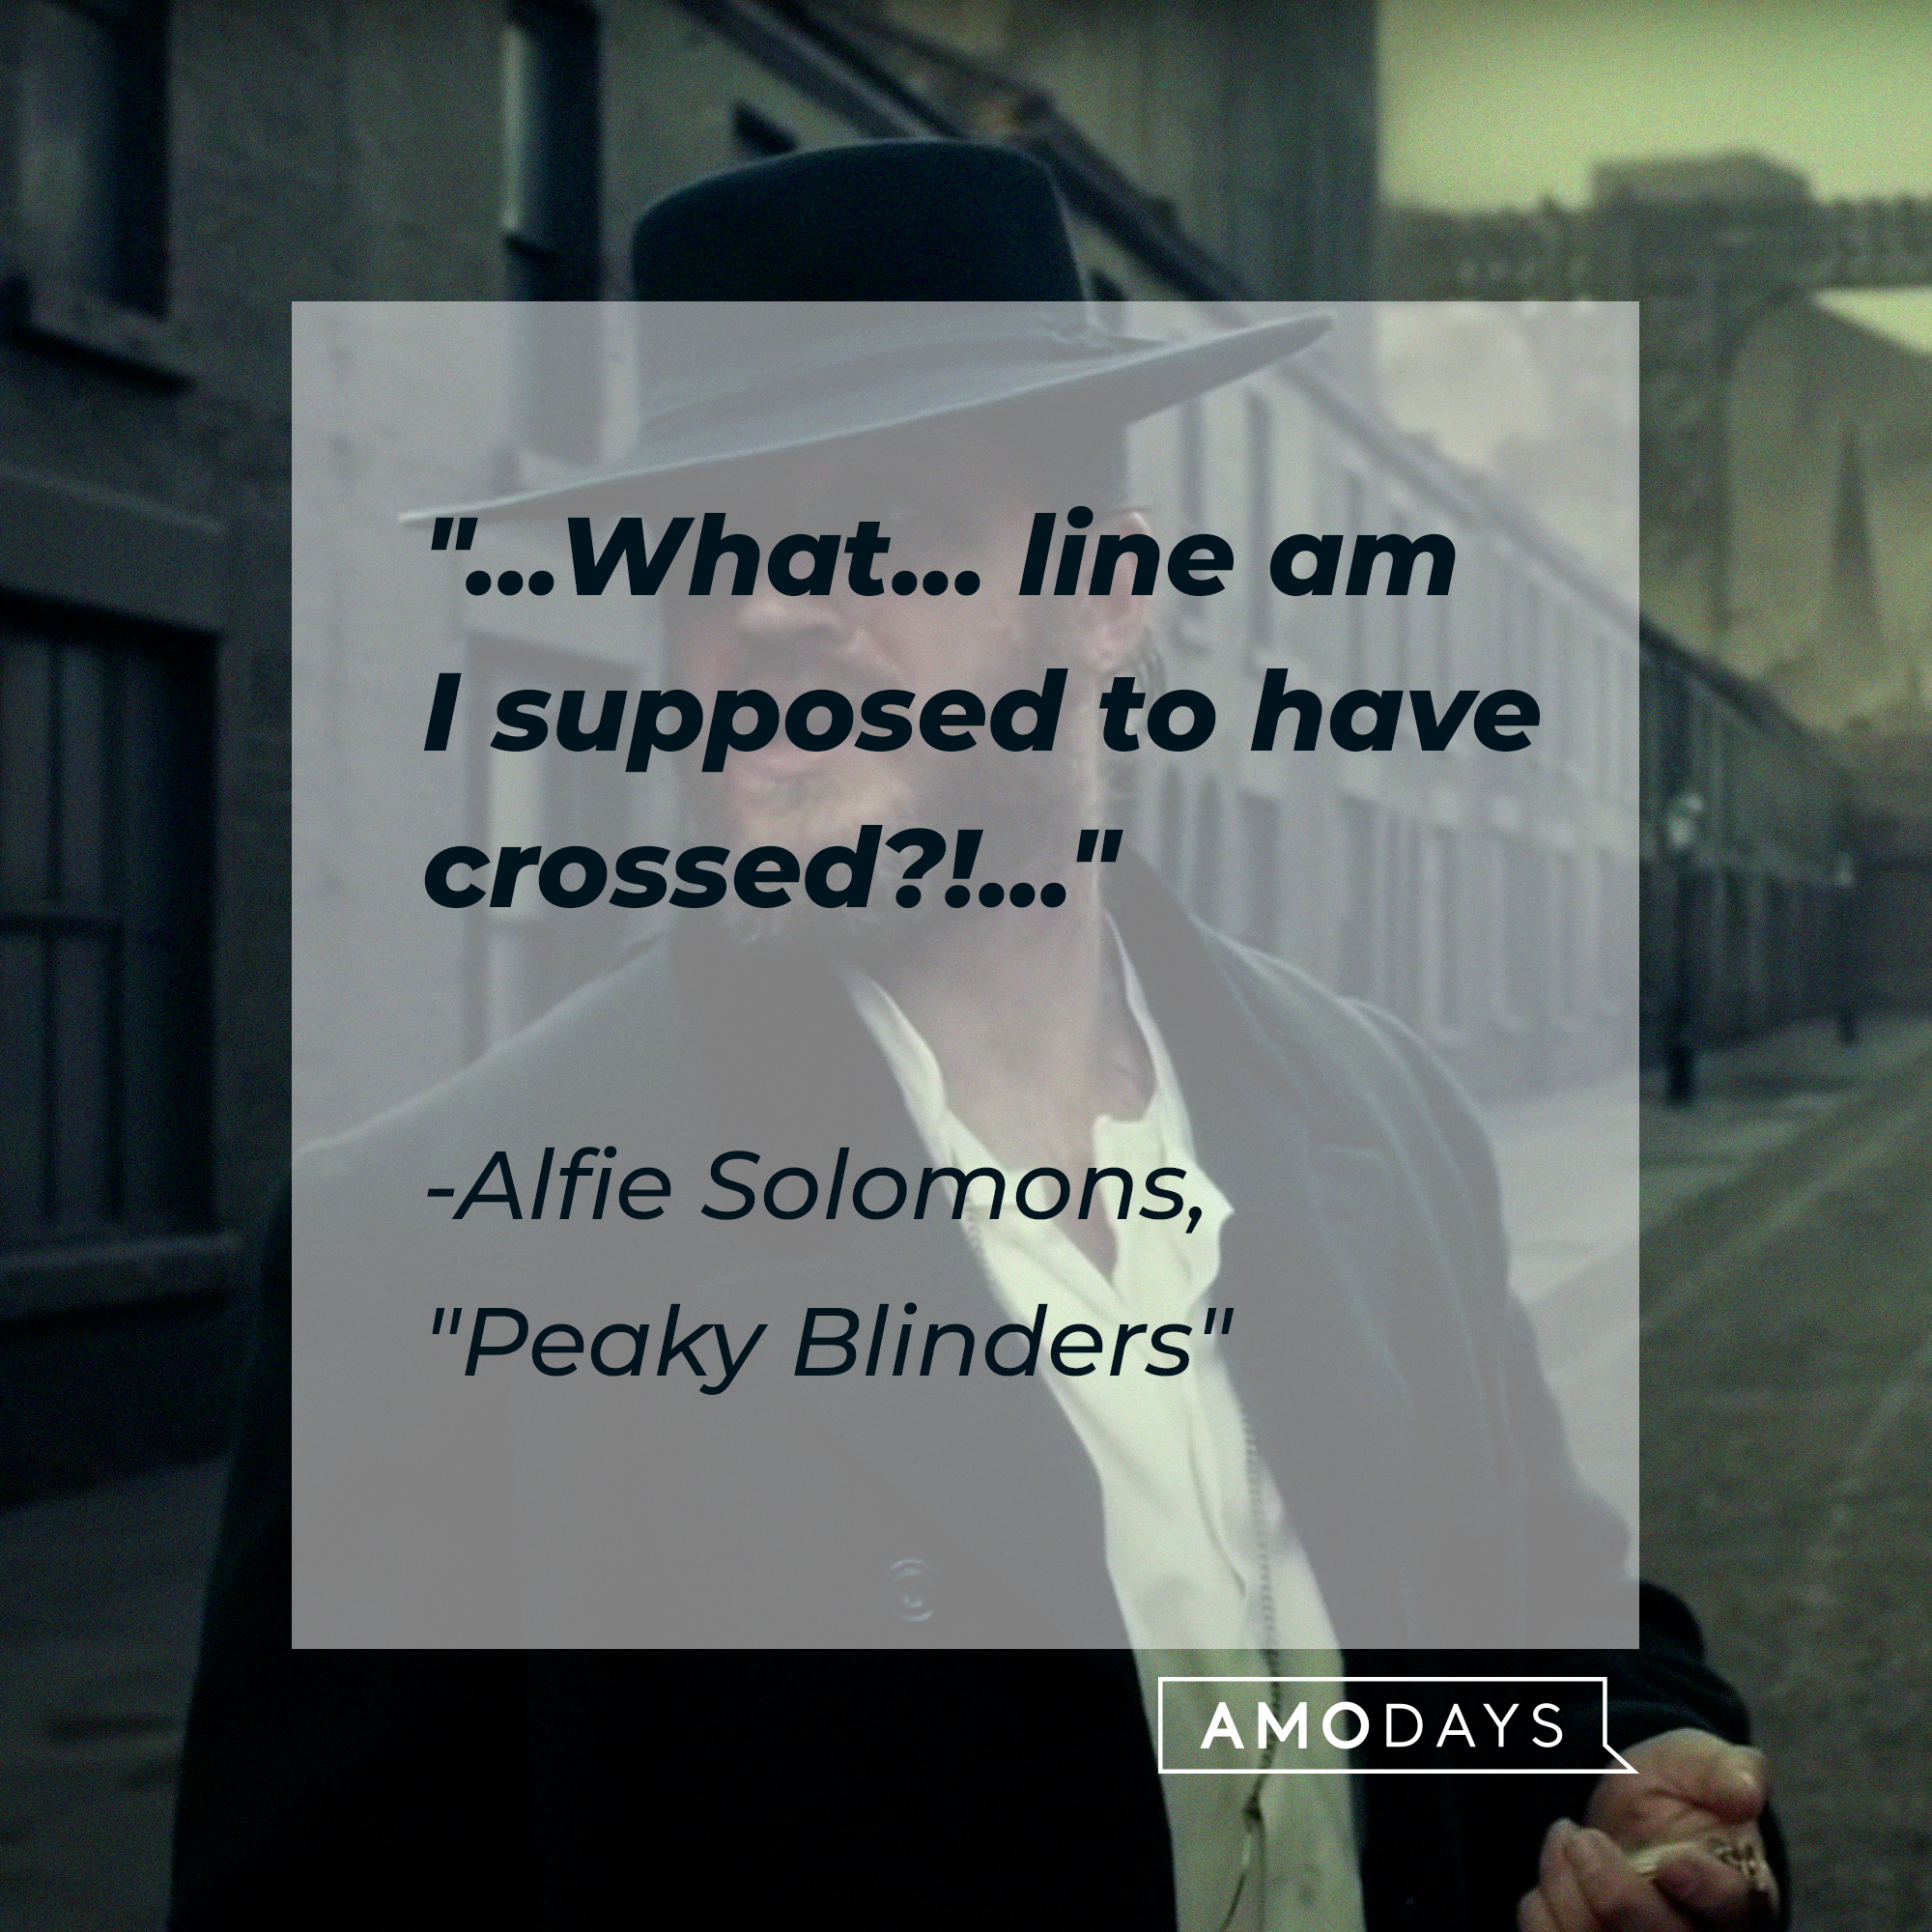 Alfie Solomons’s quote: "...What... line am I supposed to have crossed?!..." | Source: facebook.com/PeakyBlinders